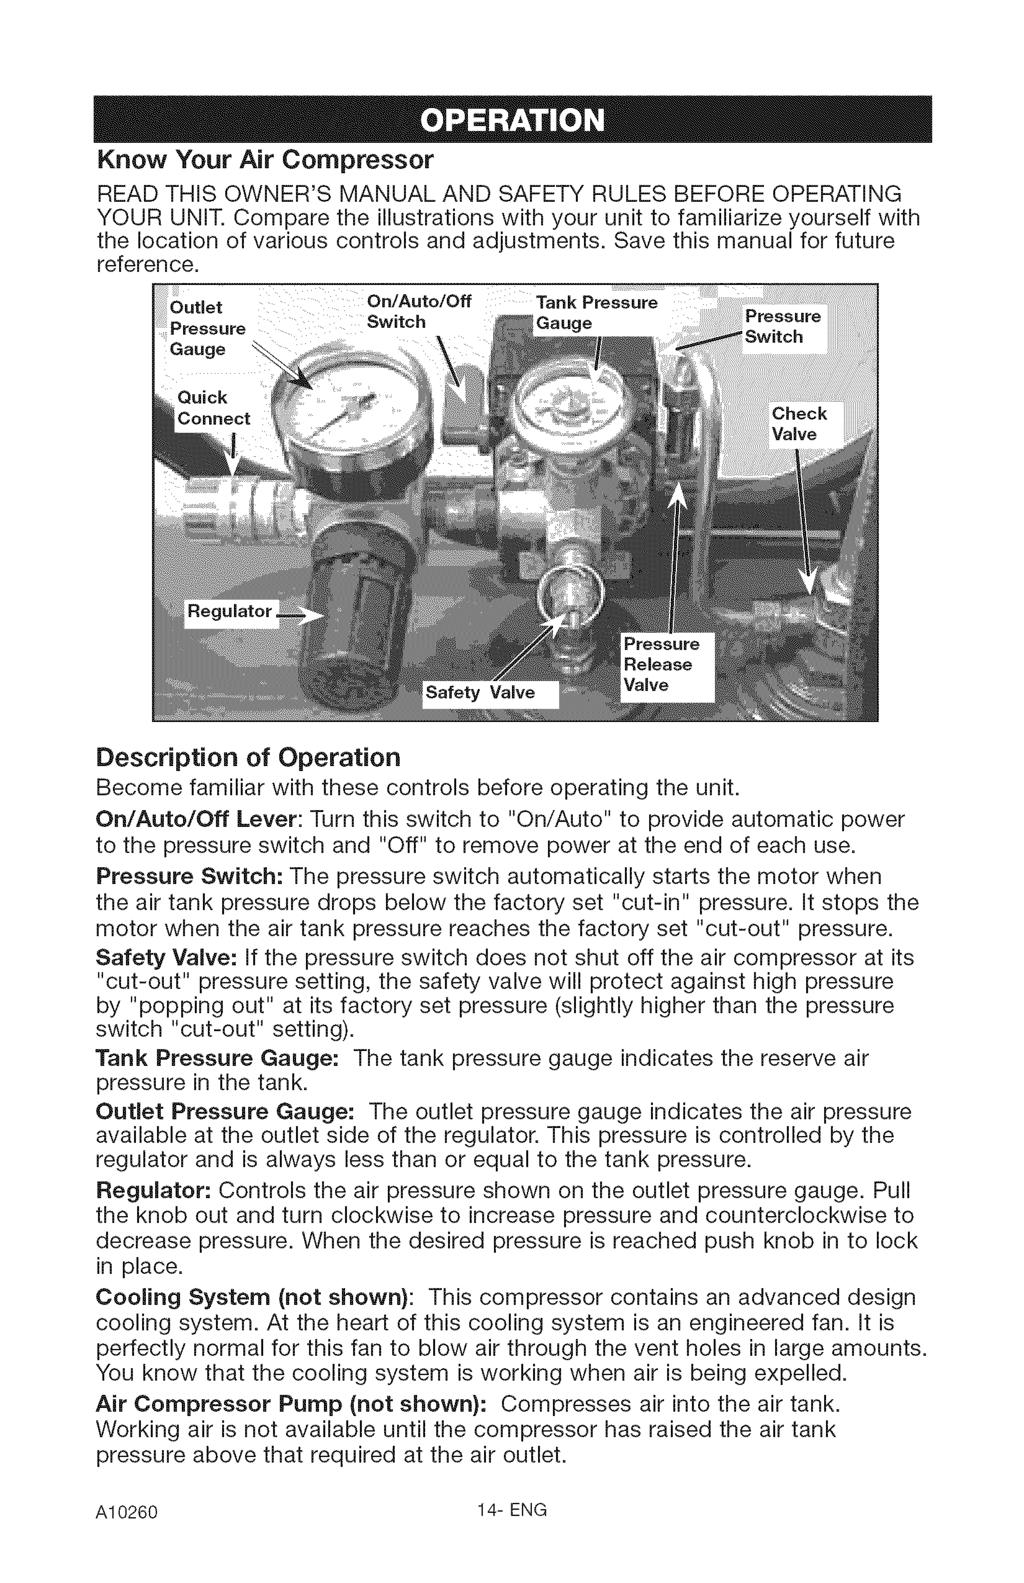 Know Your Air Compressor READ THIS OWNER'S MANUAL AND SAFETY RULES BEFORE OPERATING YOUR UNIT.